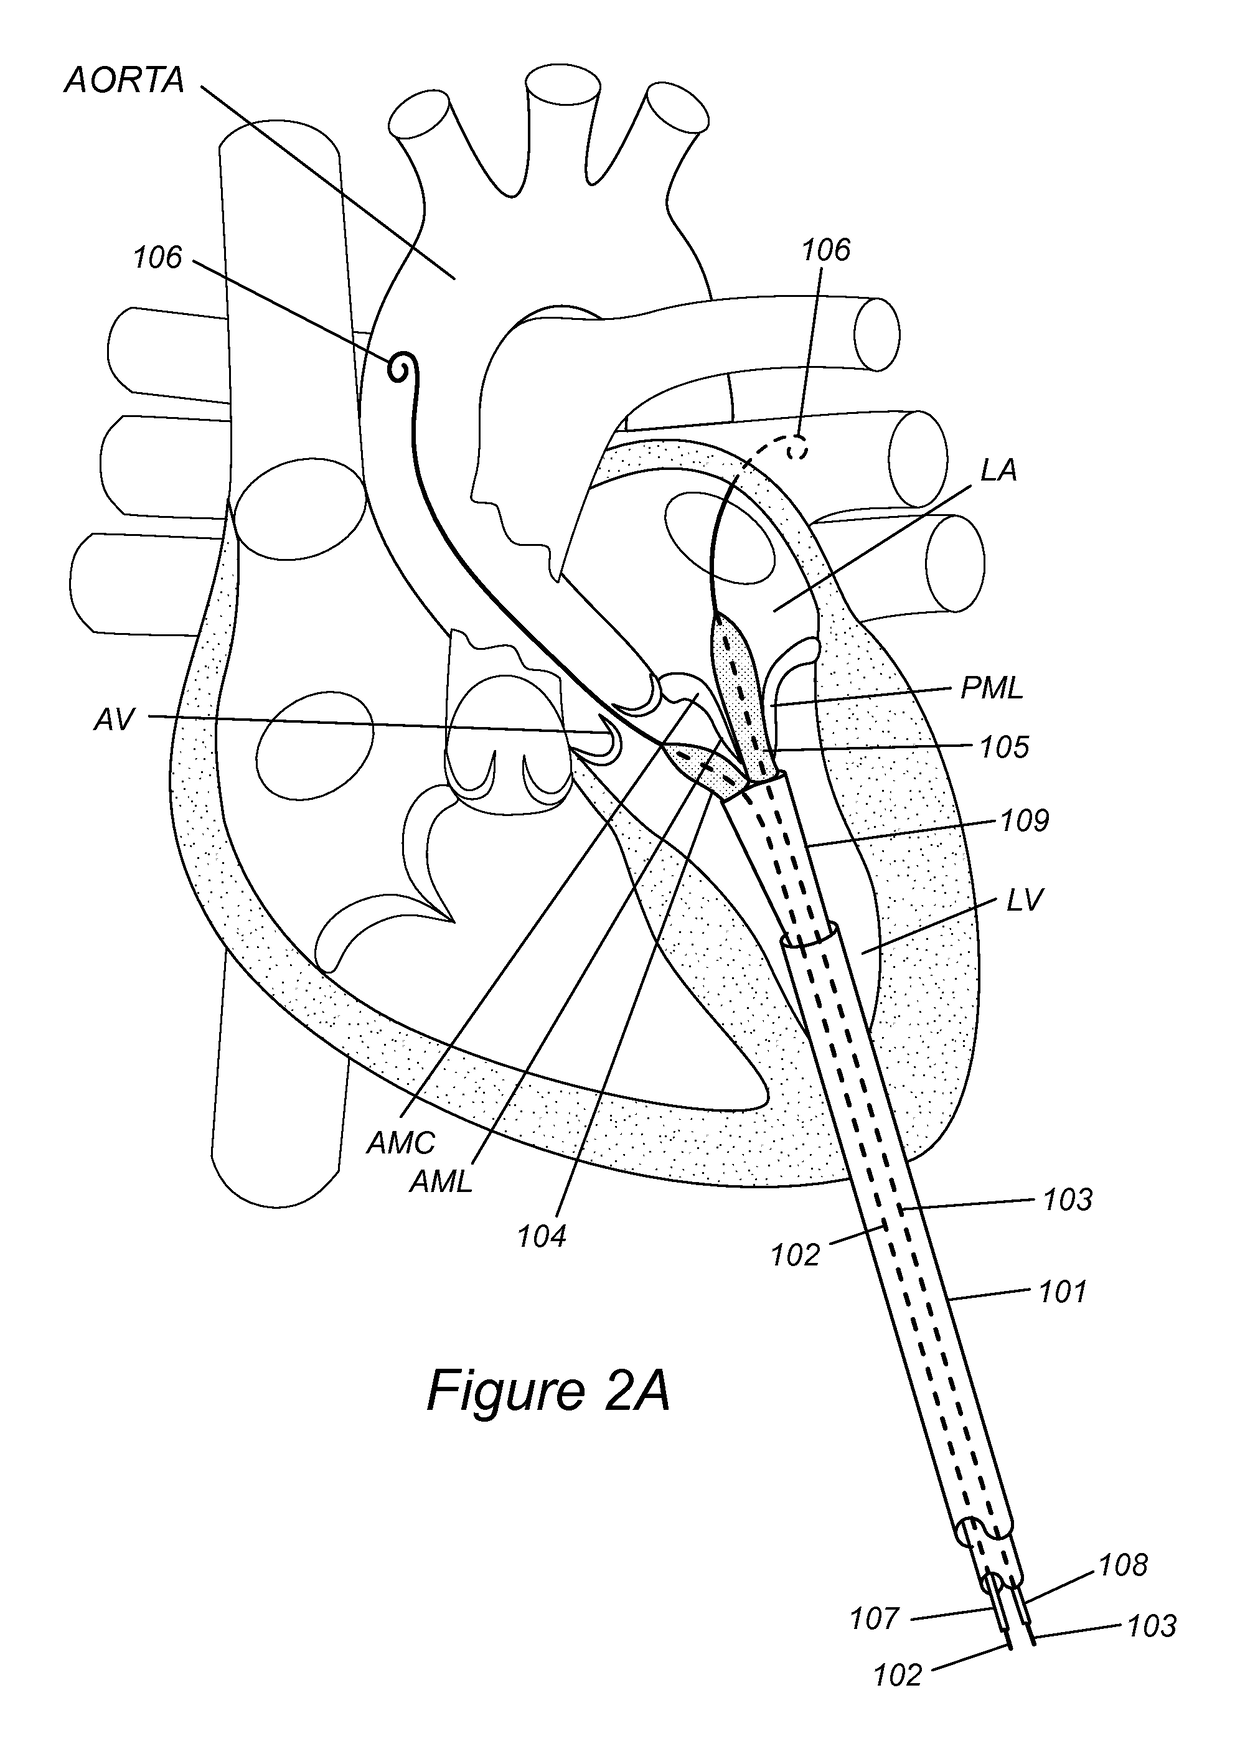 Anatomically-orientated and self-positioning transcatheter mitral valve